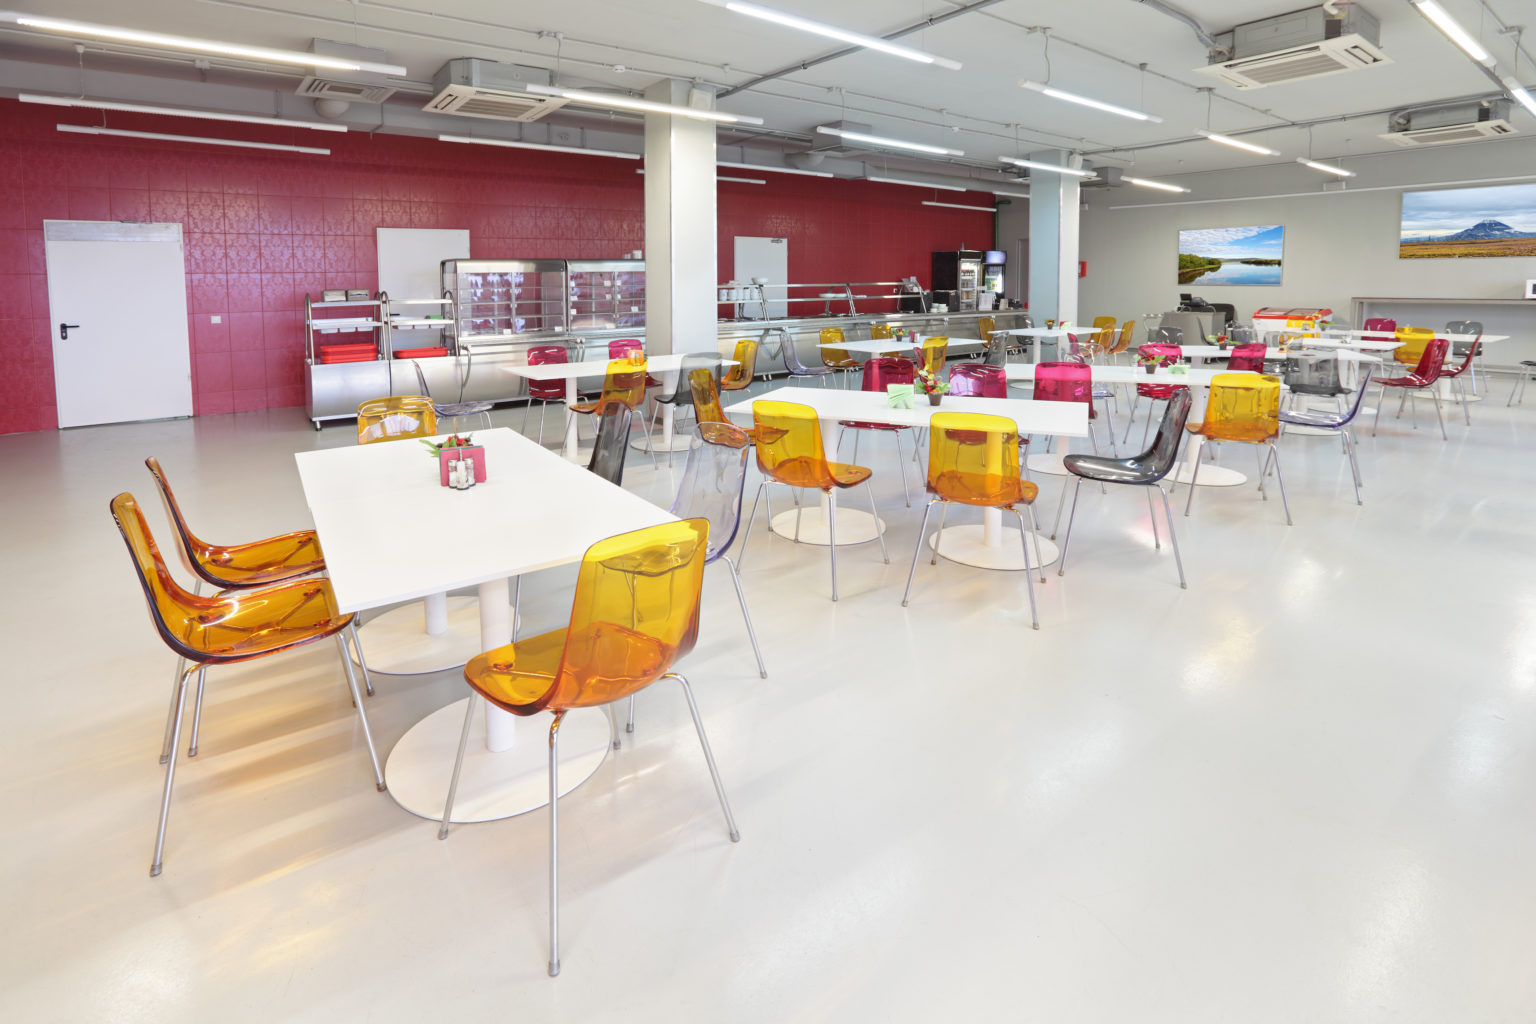 The interior of the factory canteen, nobody